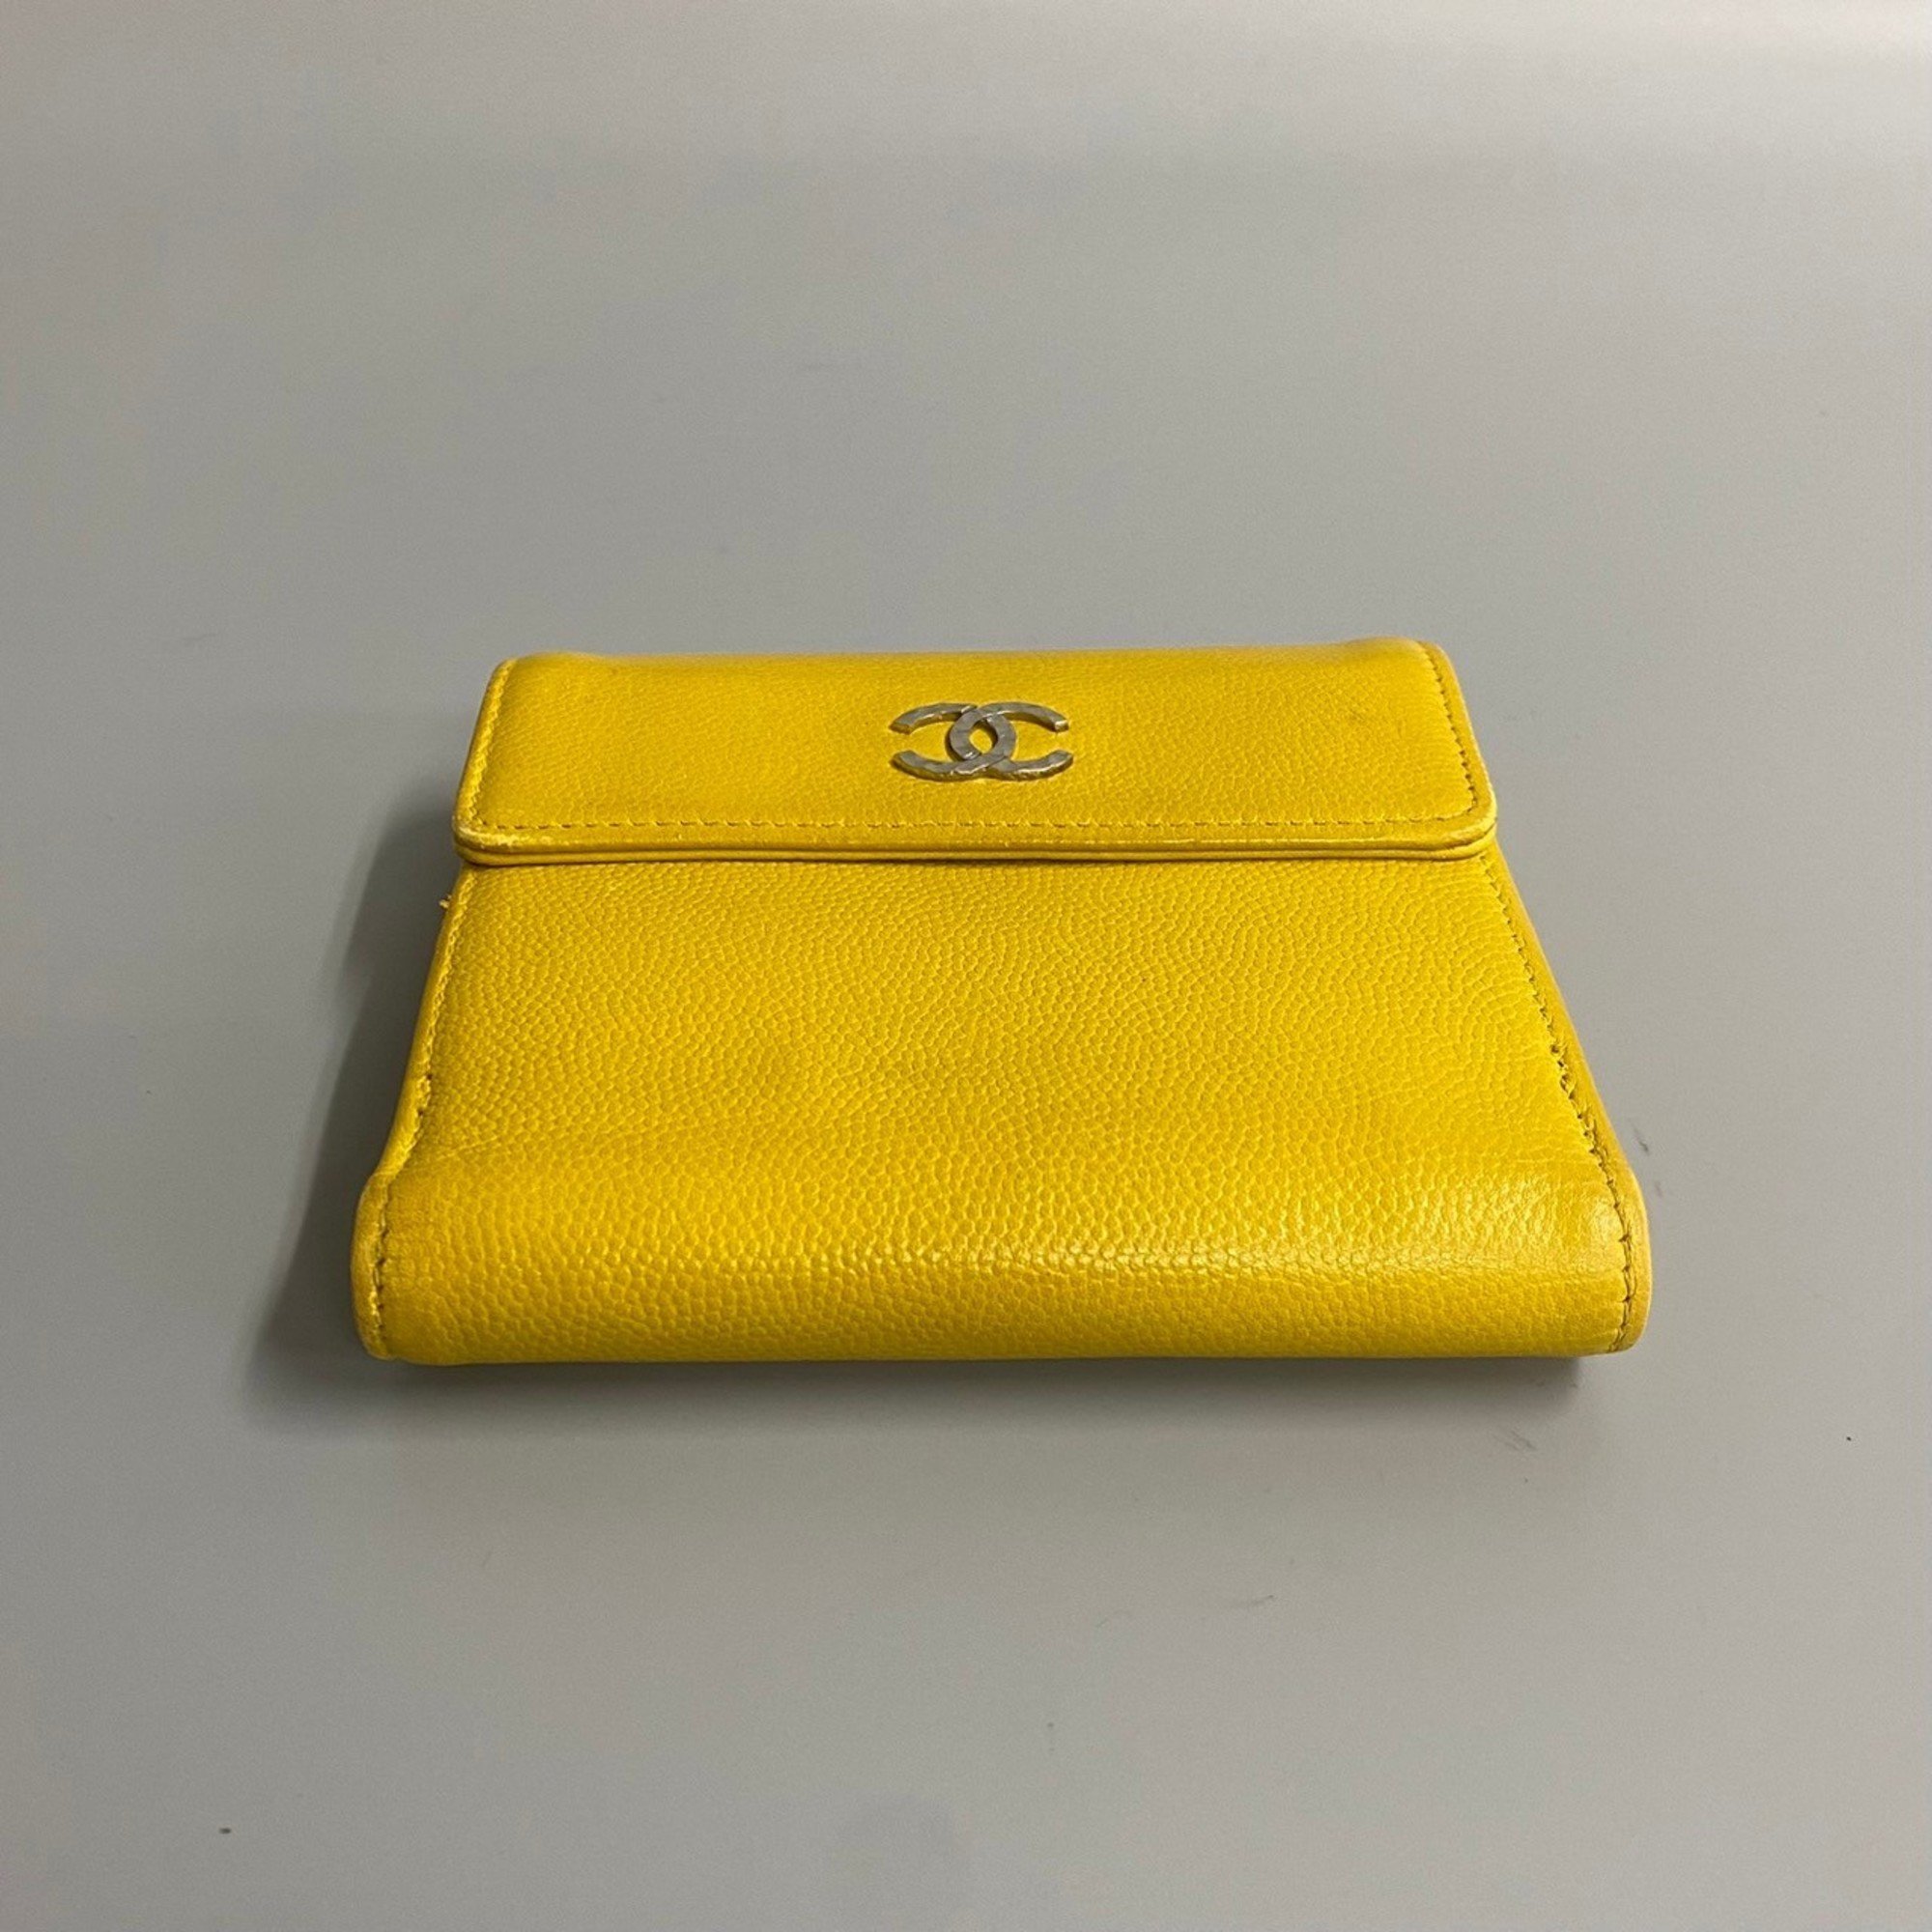 CHANEL Caviar skin leather W bifold wallet compact yellow 44010